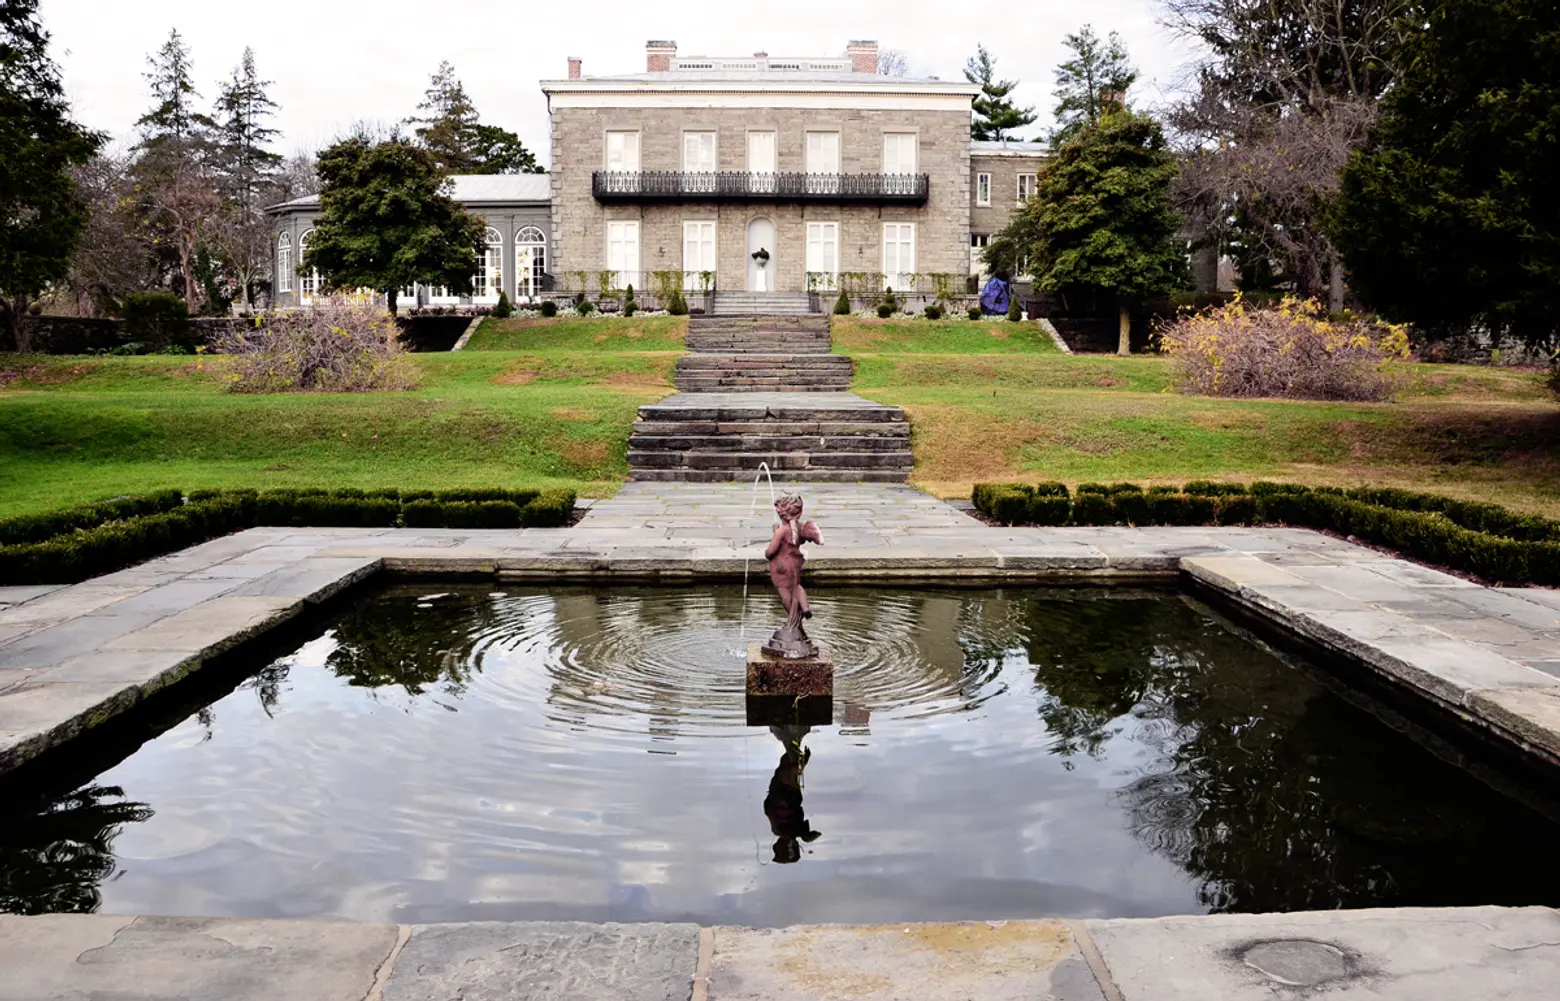 The Bartow Pell Mansion